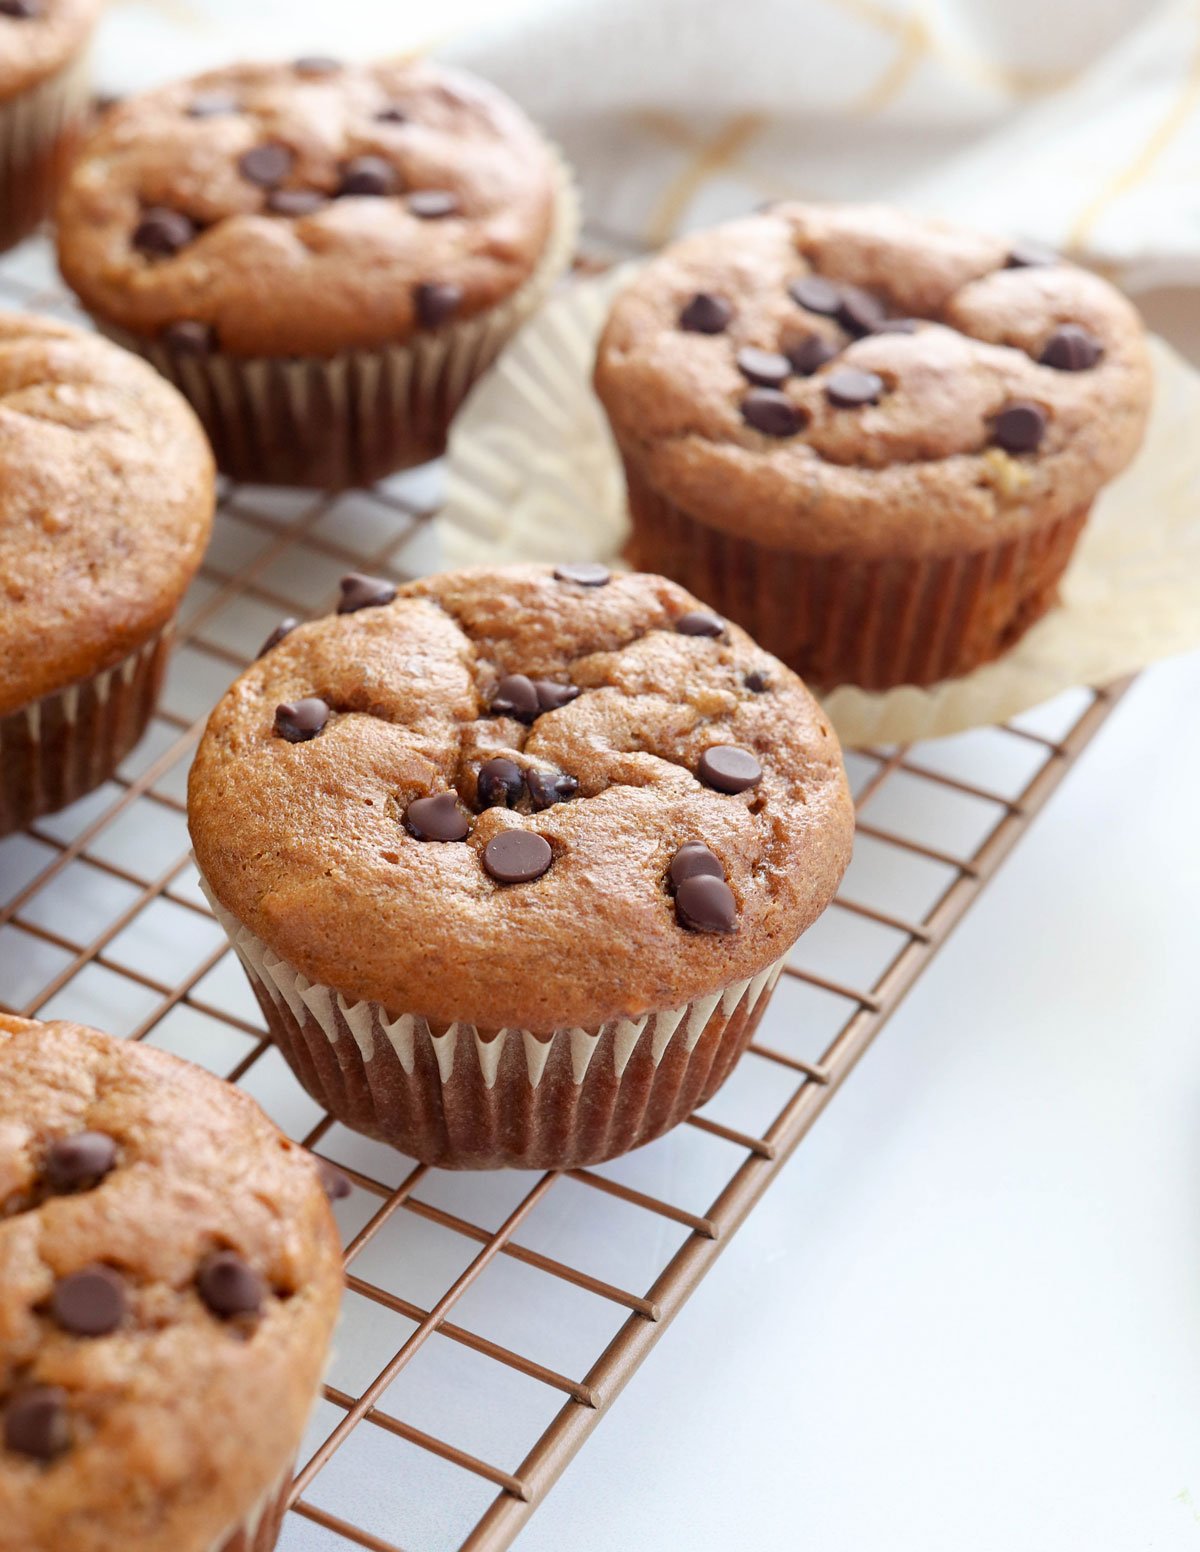 peanut butter banana muffins with chocolate chips on top